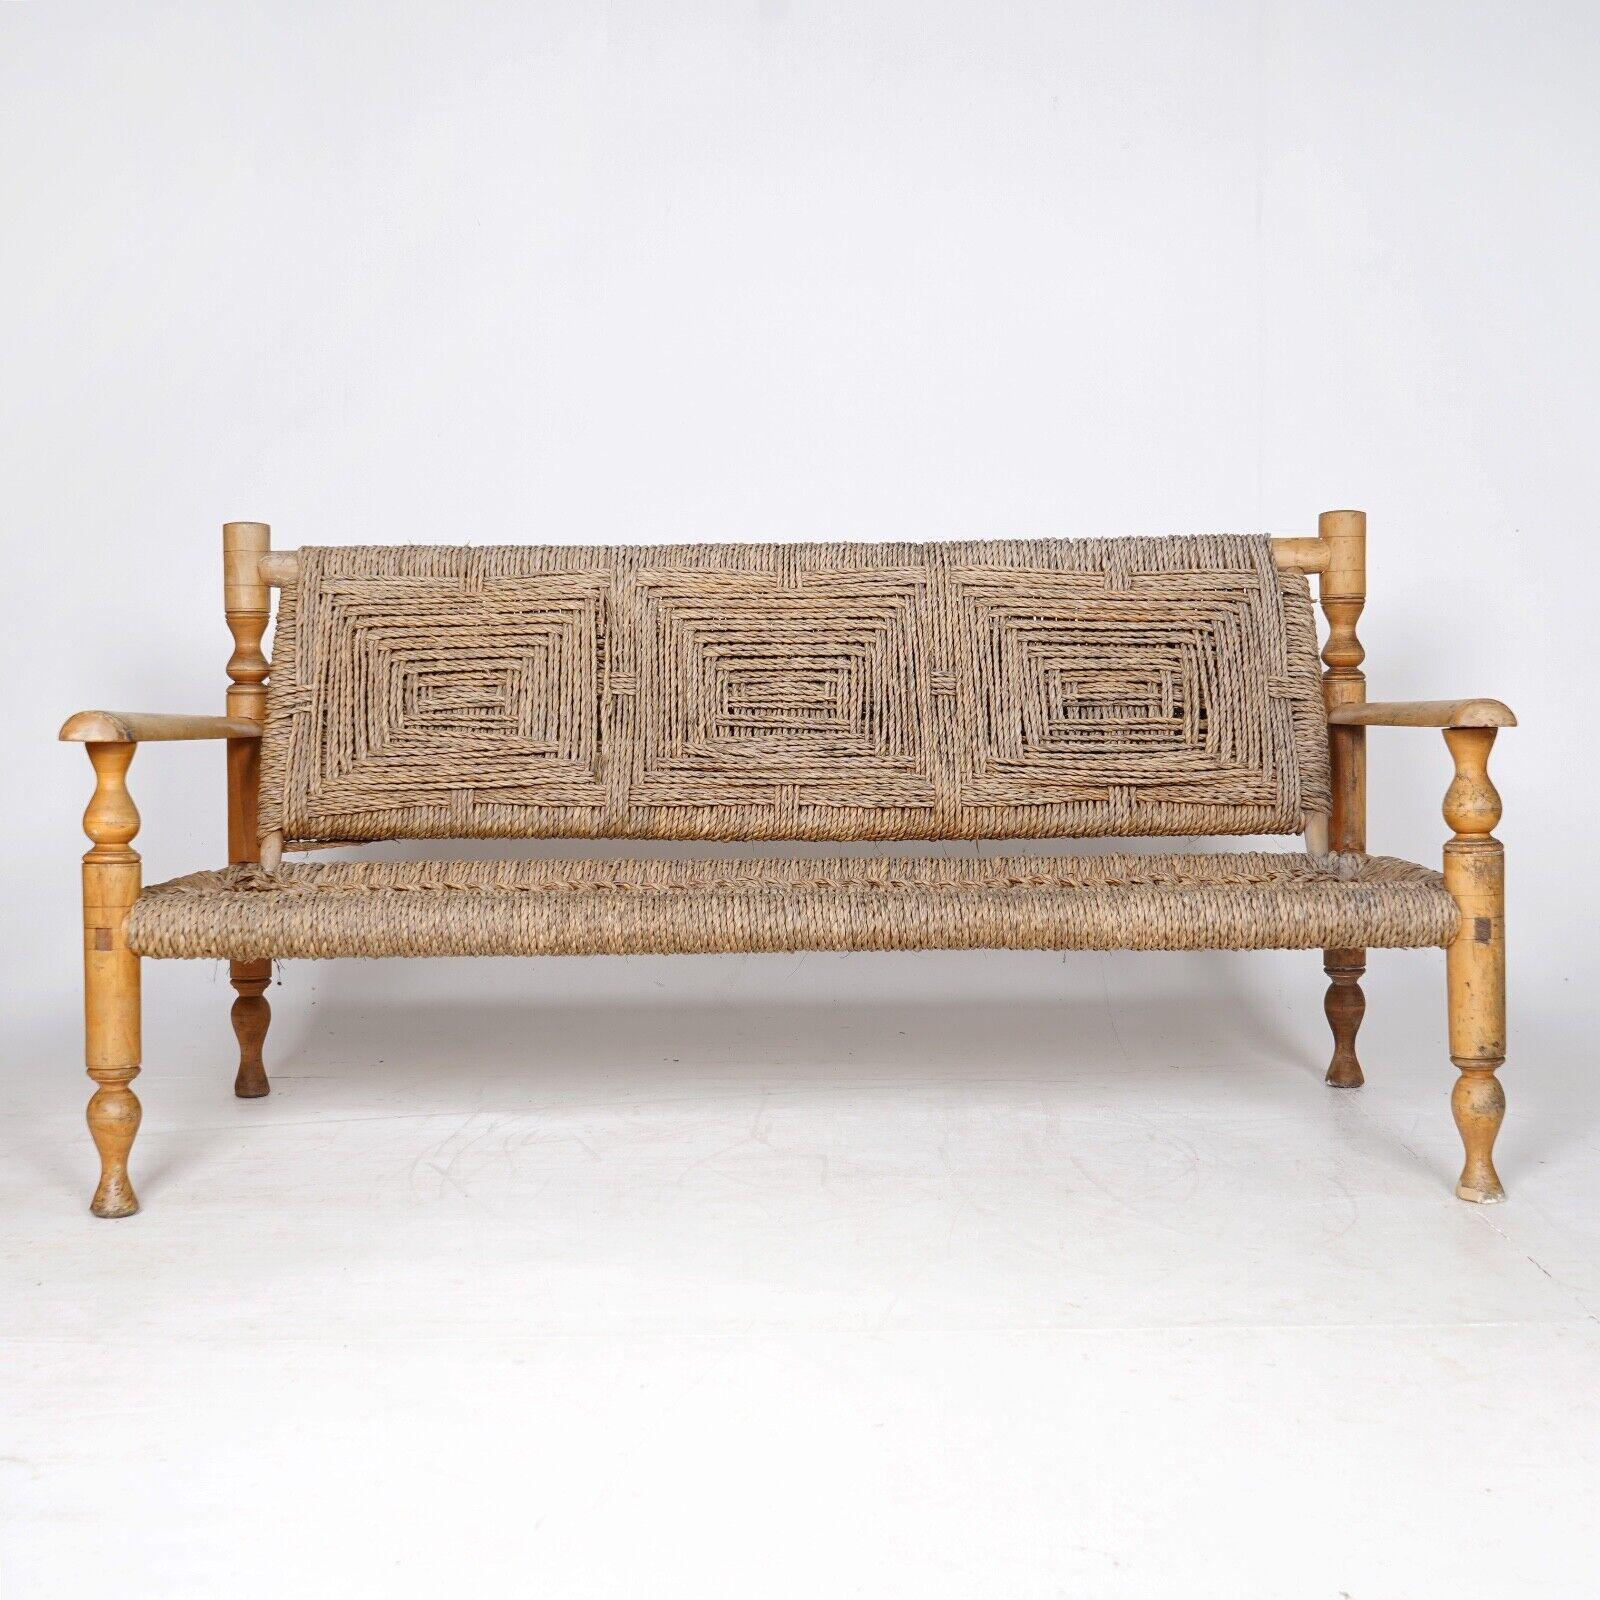 A 1950s rope bench in the style of French furniture designers Adrian & Frida Audoux-Minet. 
The bench features turned beech wood frame and original hand woven abaca rope seats and backs. 
The condition is fair, rope seat and back perfect. The front